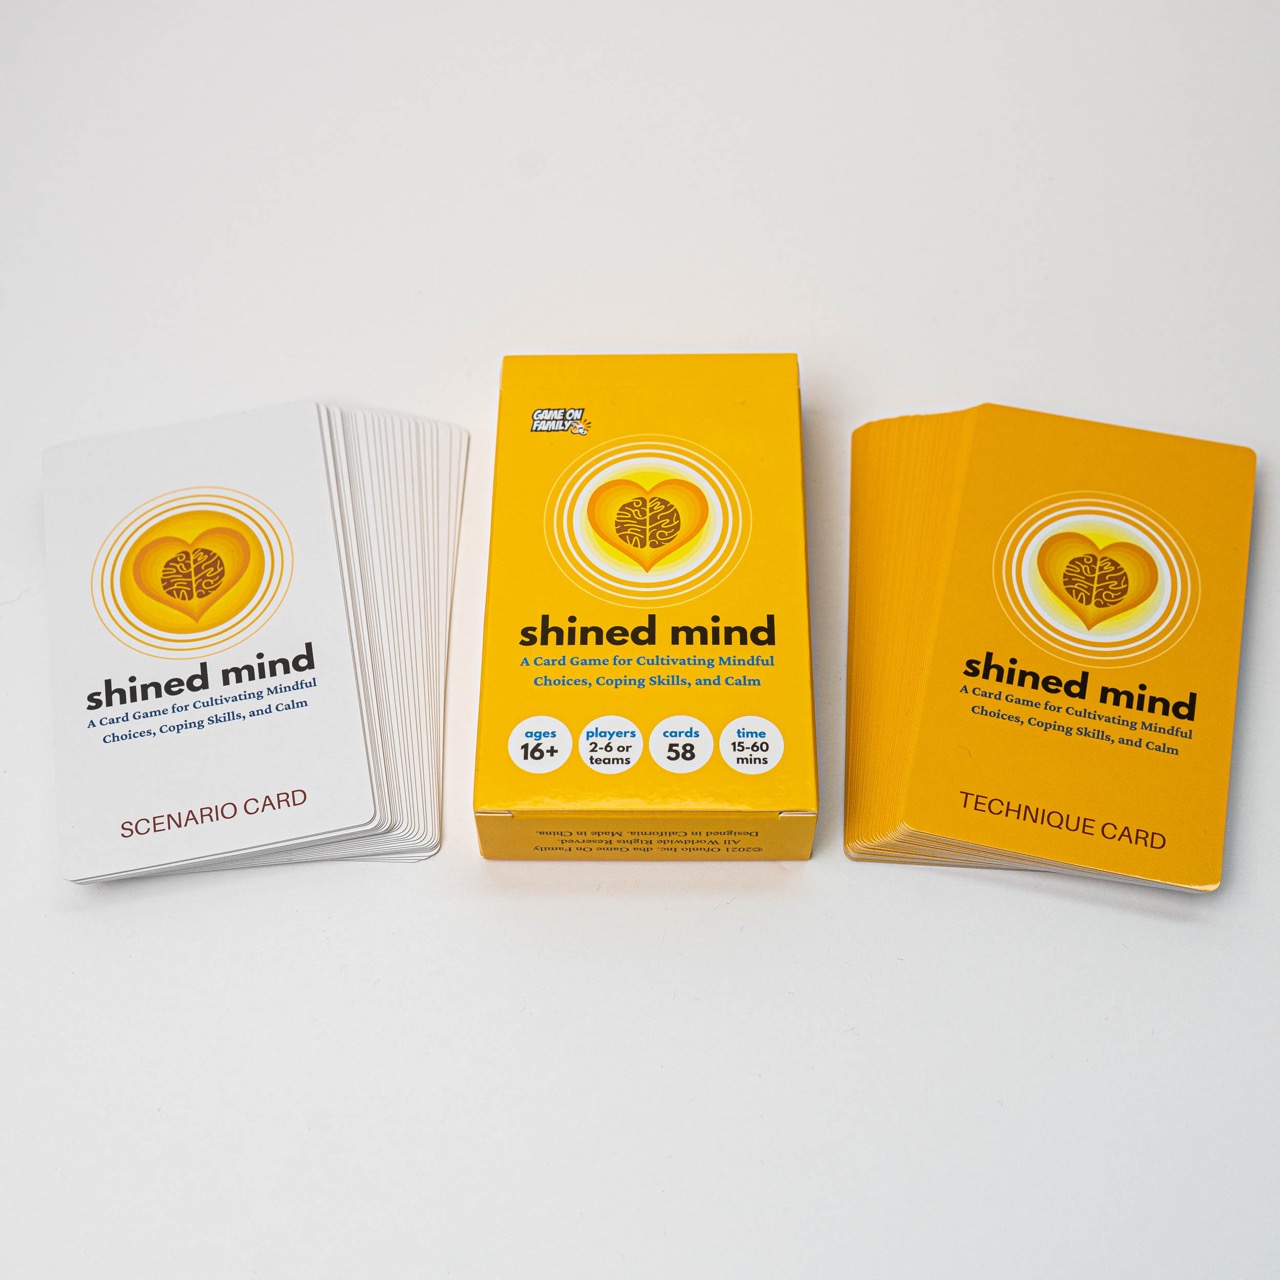 Shined Mind: A Card Game for Cultivating Mindful Choices, Coping Skills, and Calm